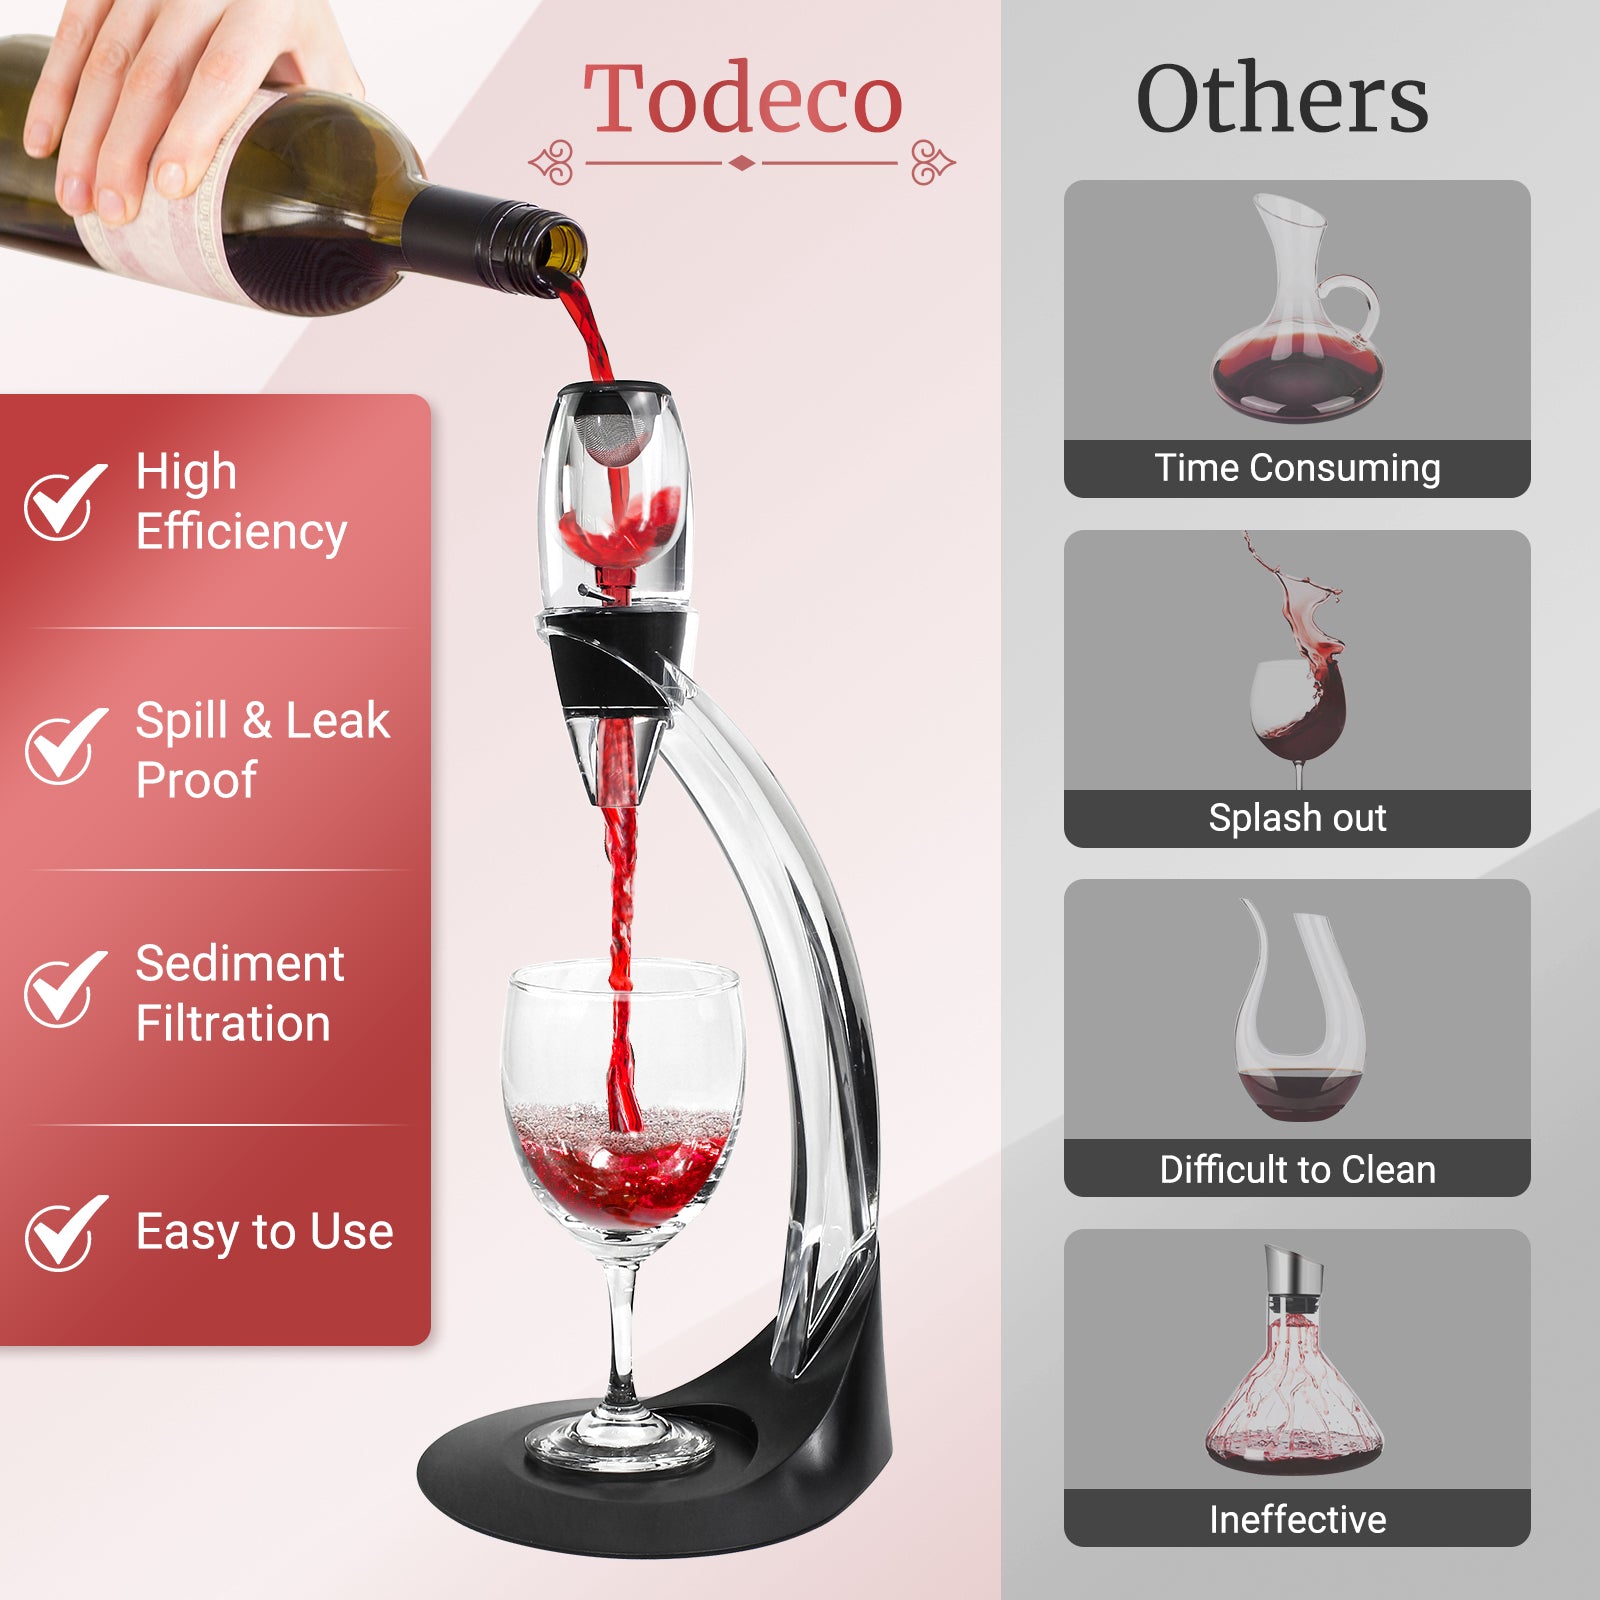 Todeco-Wine-Aerator-with-Stand-Magic-Wine-Decanter-with-Wine-Filter-Anti-Drip-Holder-Wine-Stopper-Velvet-Pouch-Air-Diffuser-Filter-Aerator-for-Wine-Lovers-Wine-Aerator